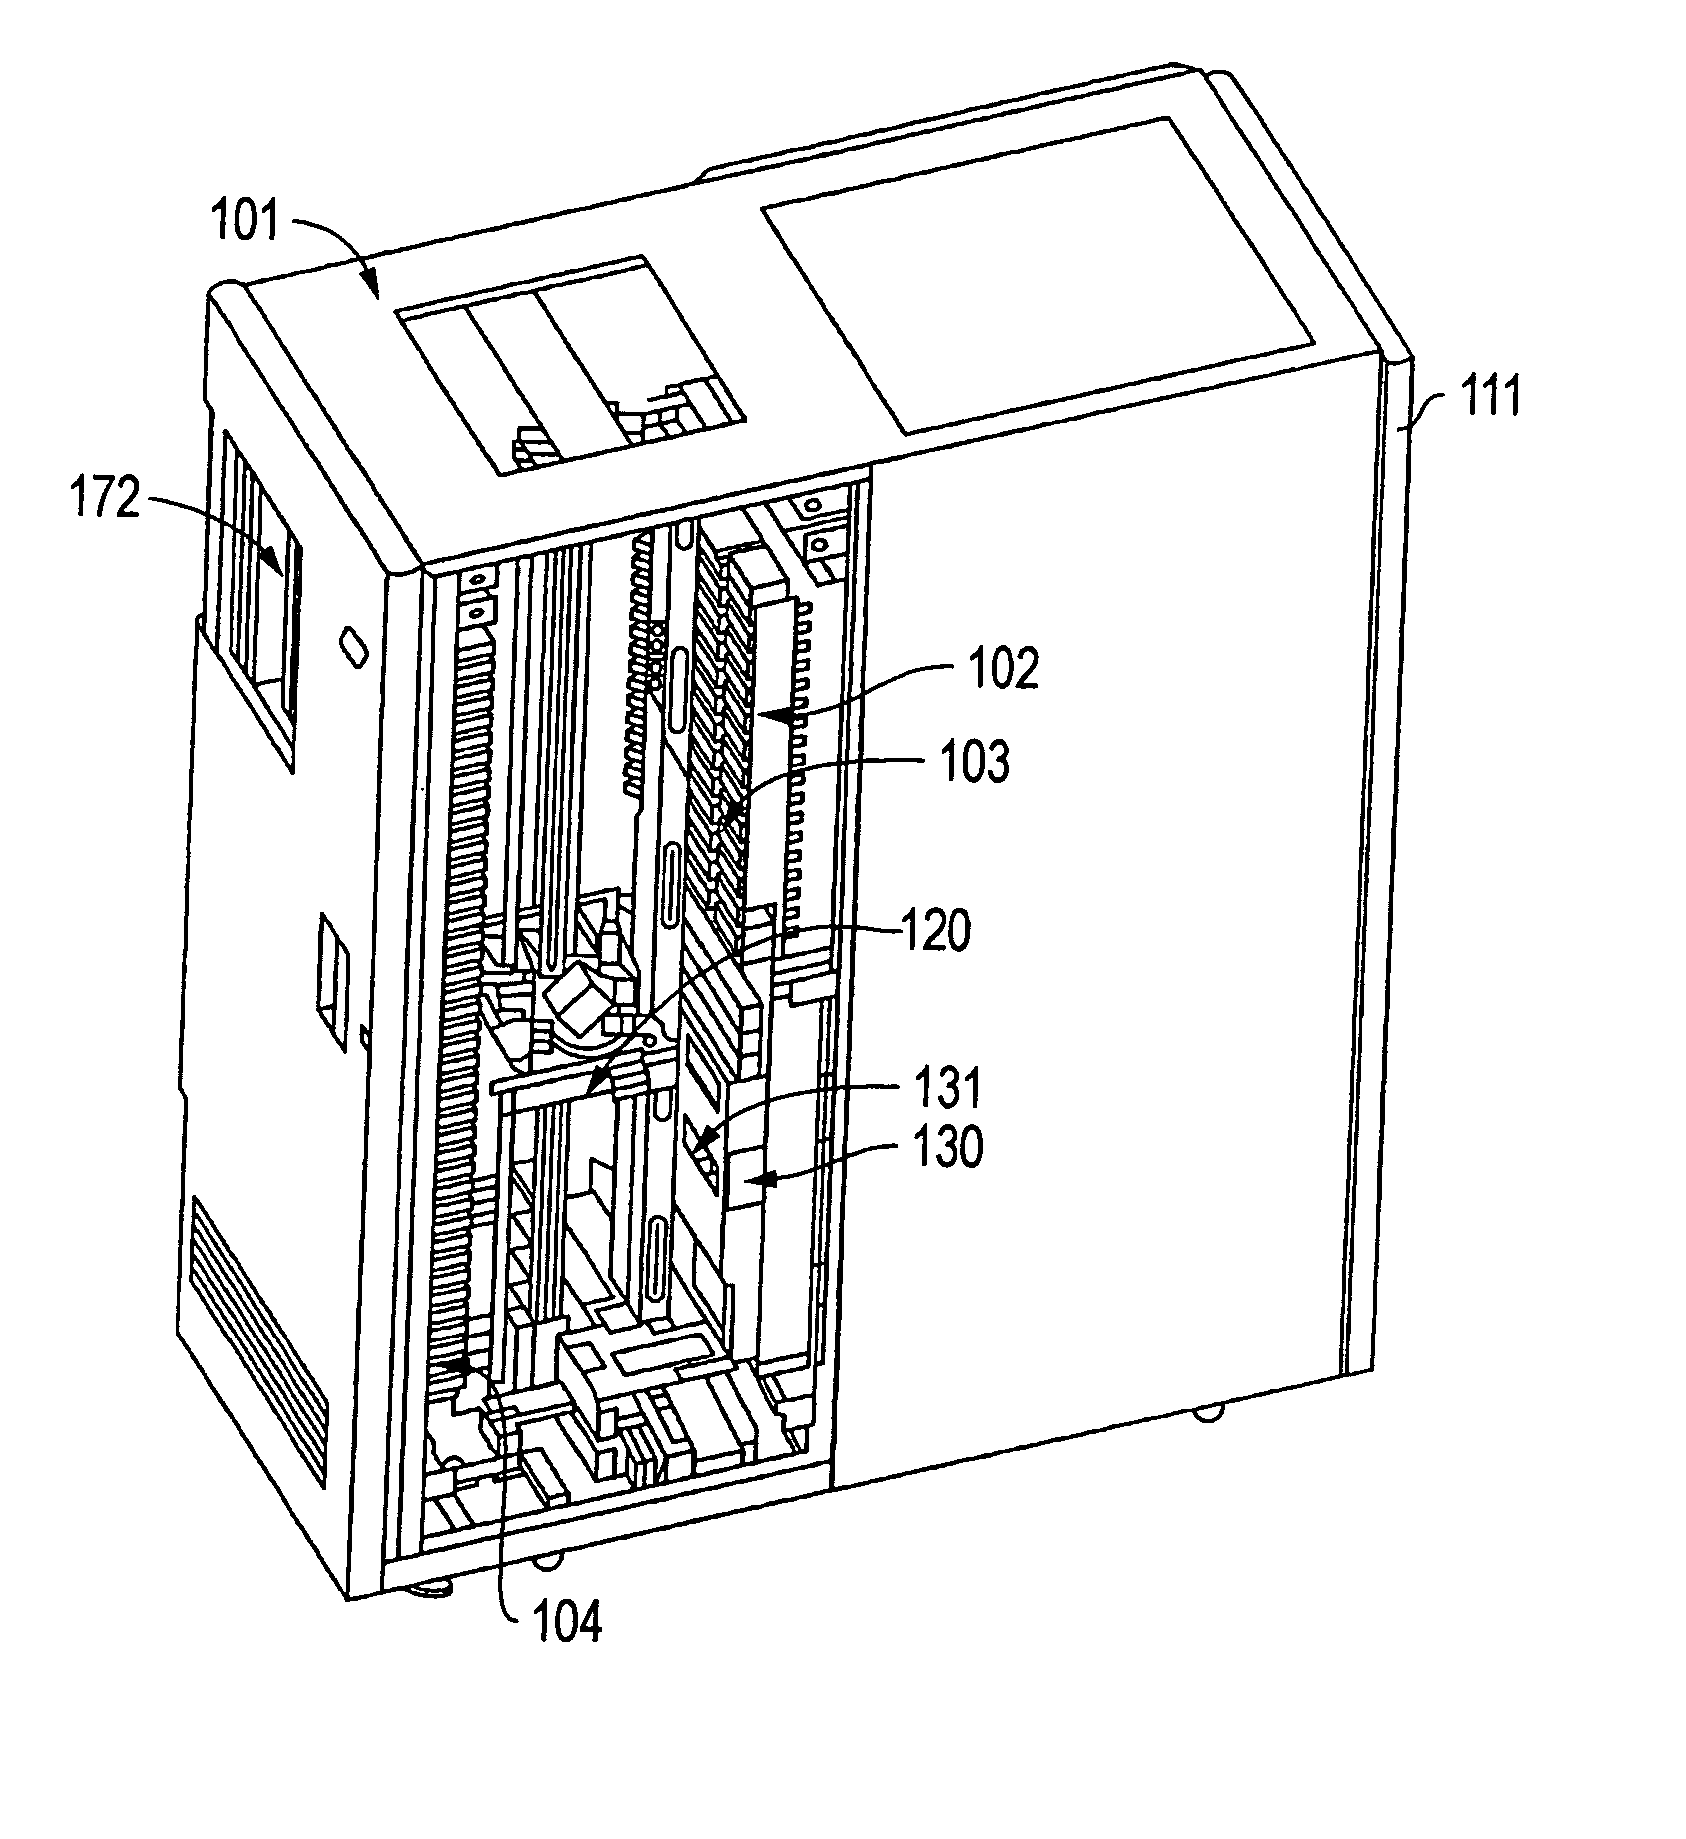 System, method, and apparatus for providing a single display panel and control for multiple data storage drives in an automated data storage library